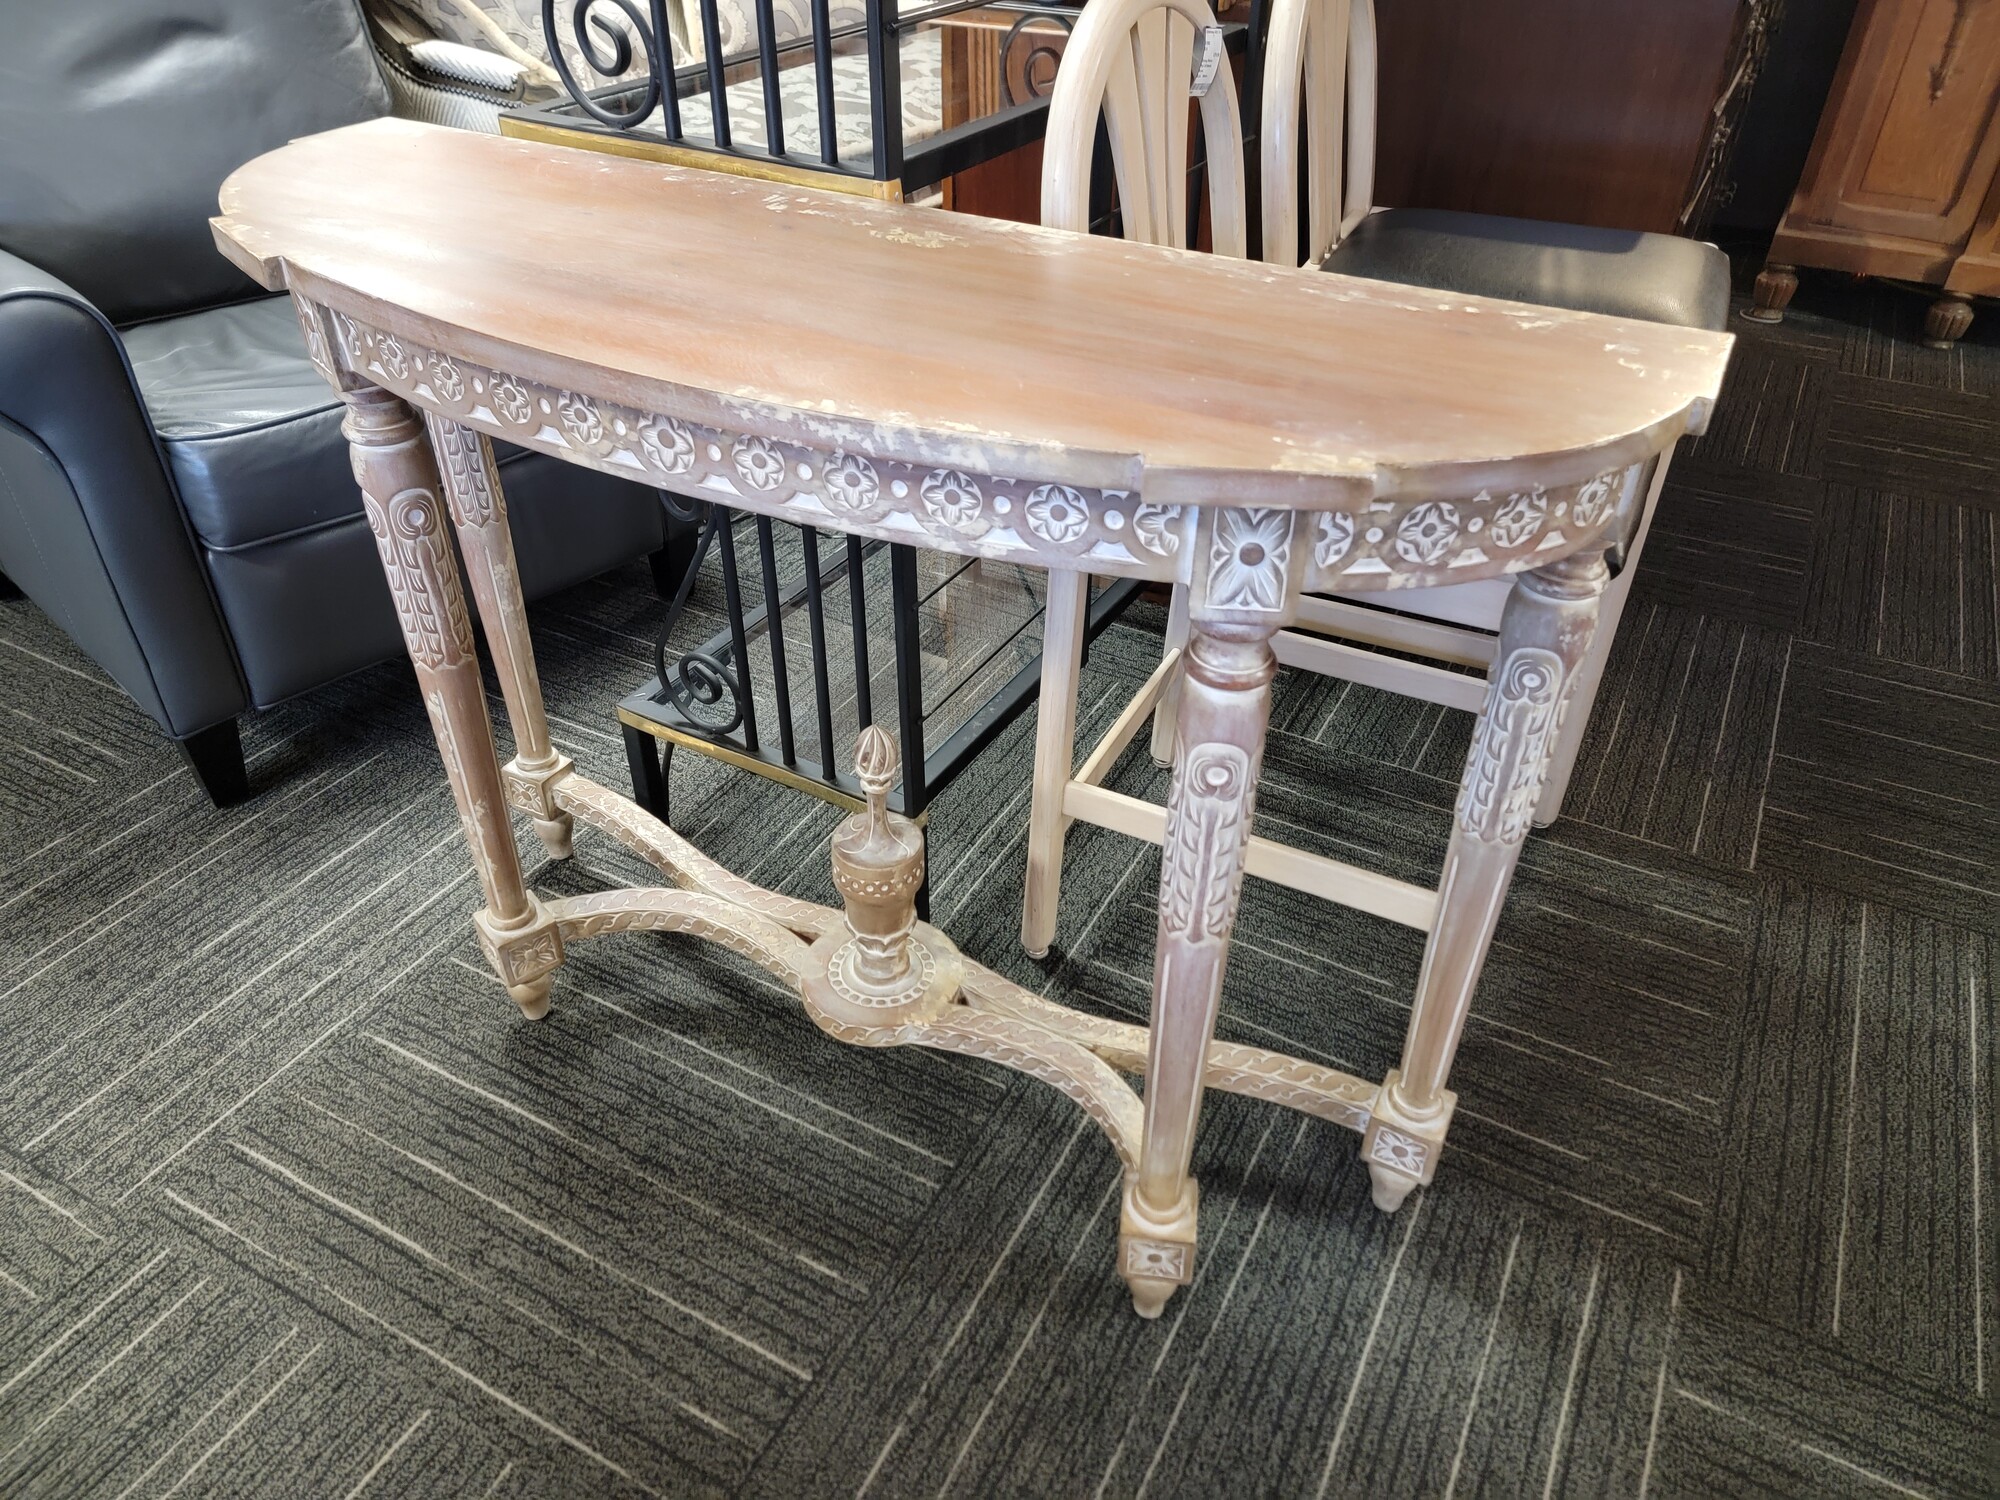 Distressed French Demilune Table in good condition.  Has ornate carvings and a white wash finish.  Measures 43' wide; 14' deep; 31' tall.